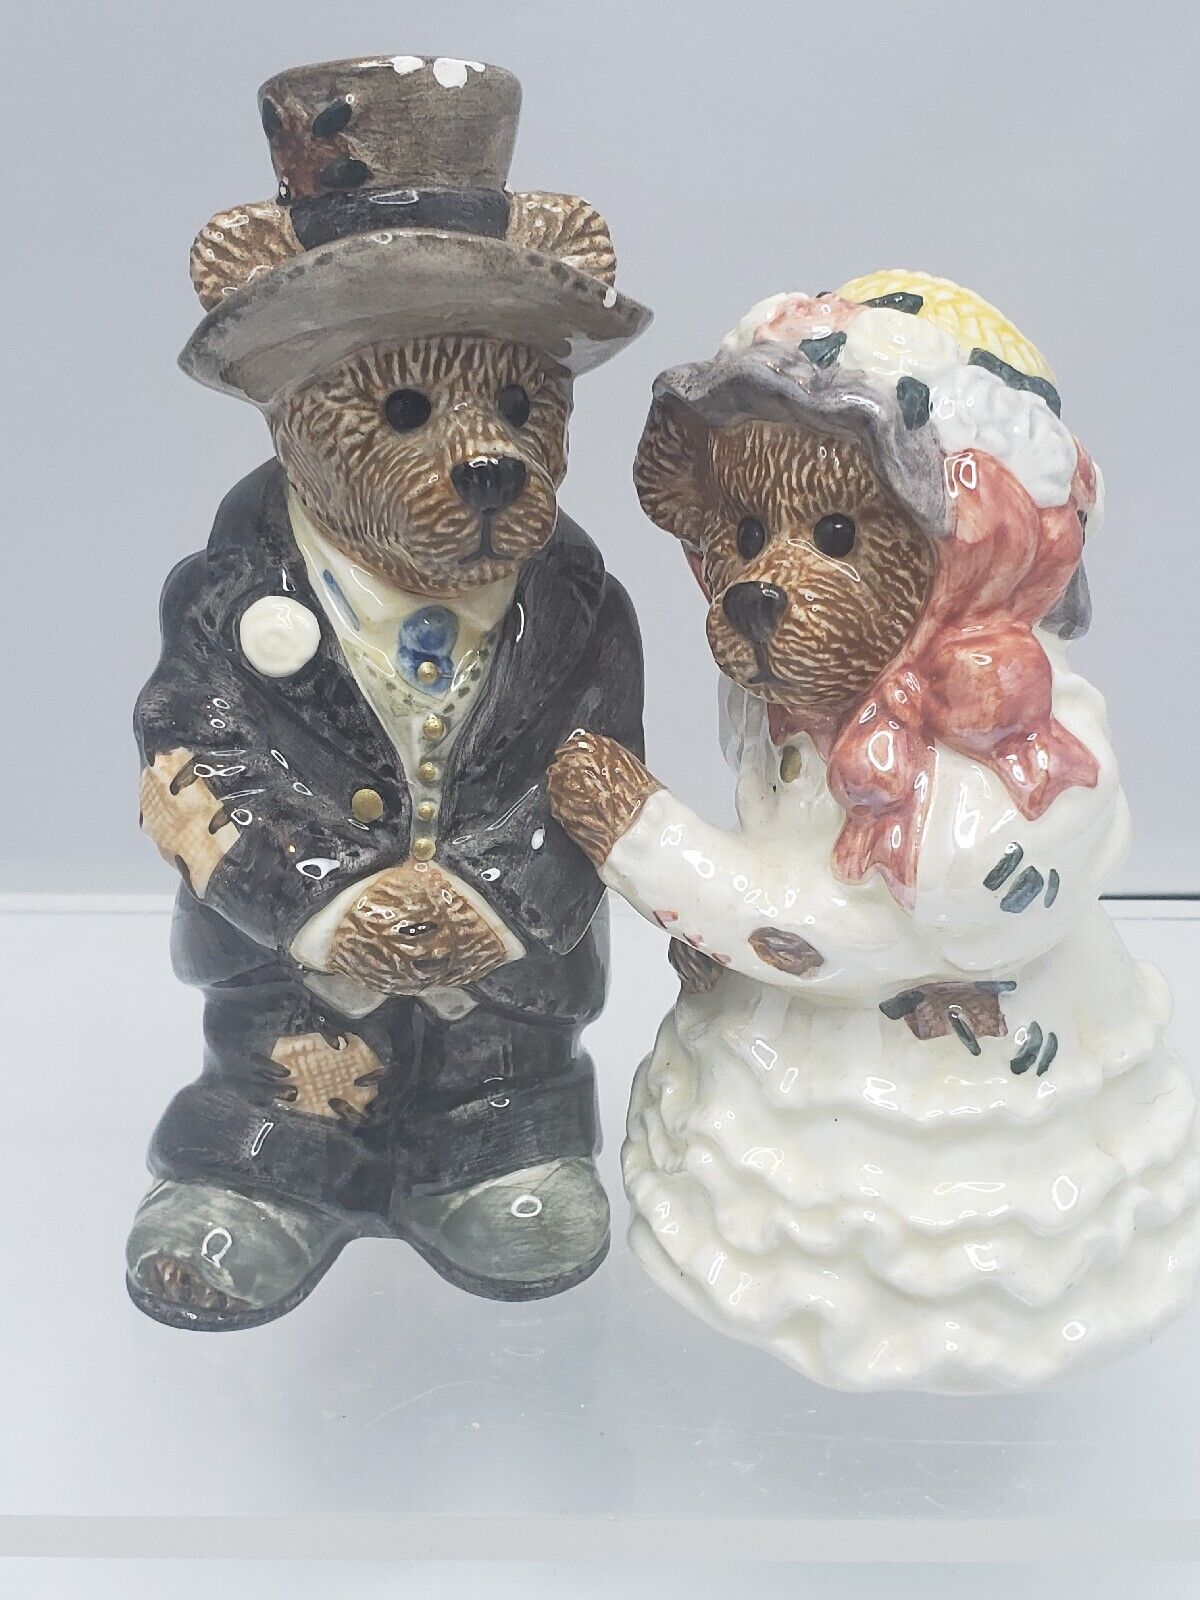 Vintage Boyds Bears Bride and Groom Salt and Pepper Shakers Authentic Bearware